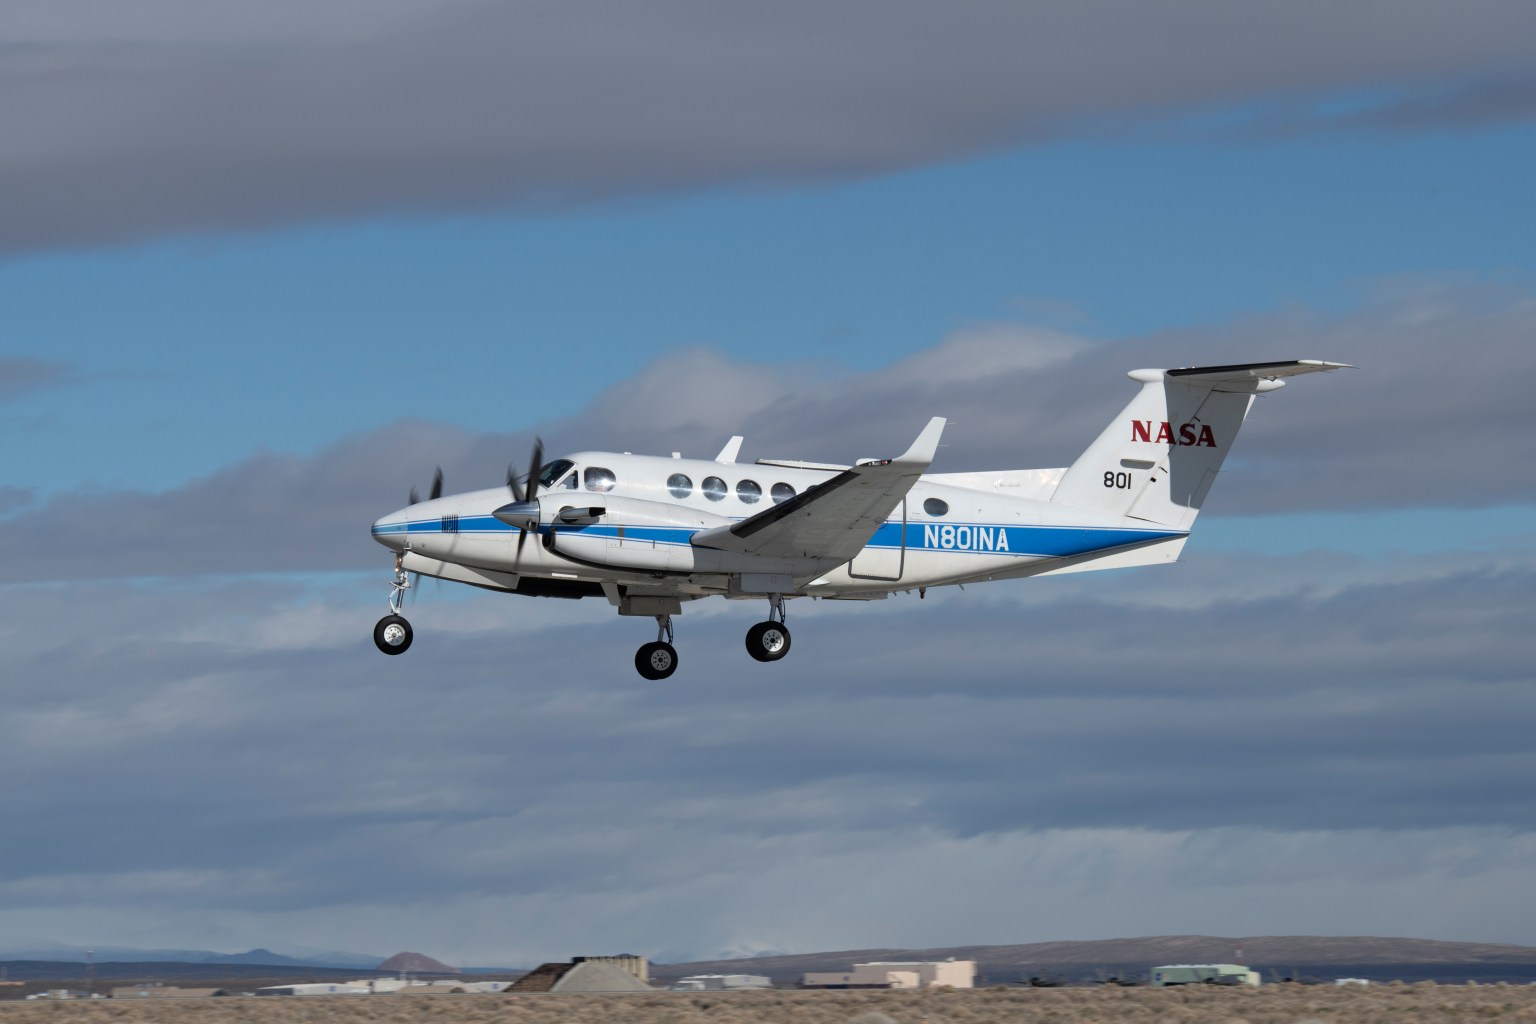 NASA’s Armstrong Flight Research Center in Edwards, California, flew the B200 King Air in support of the Signals of Opportunity Synthetic Aperture Radar (SoOpSAR) campaign.